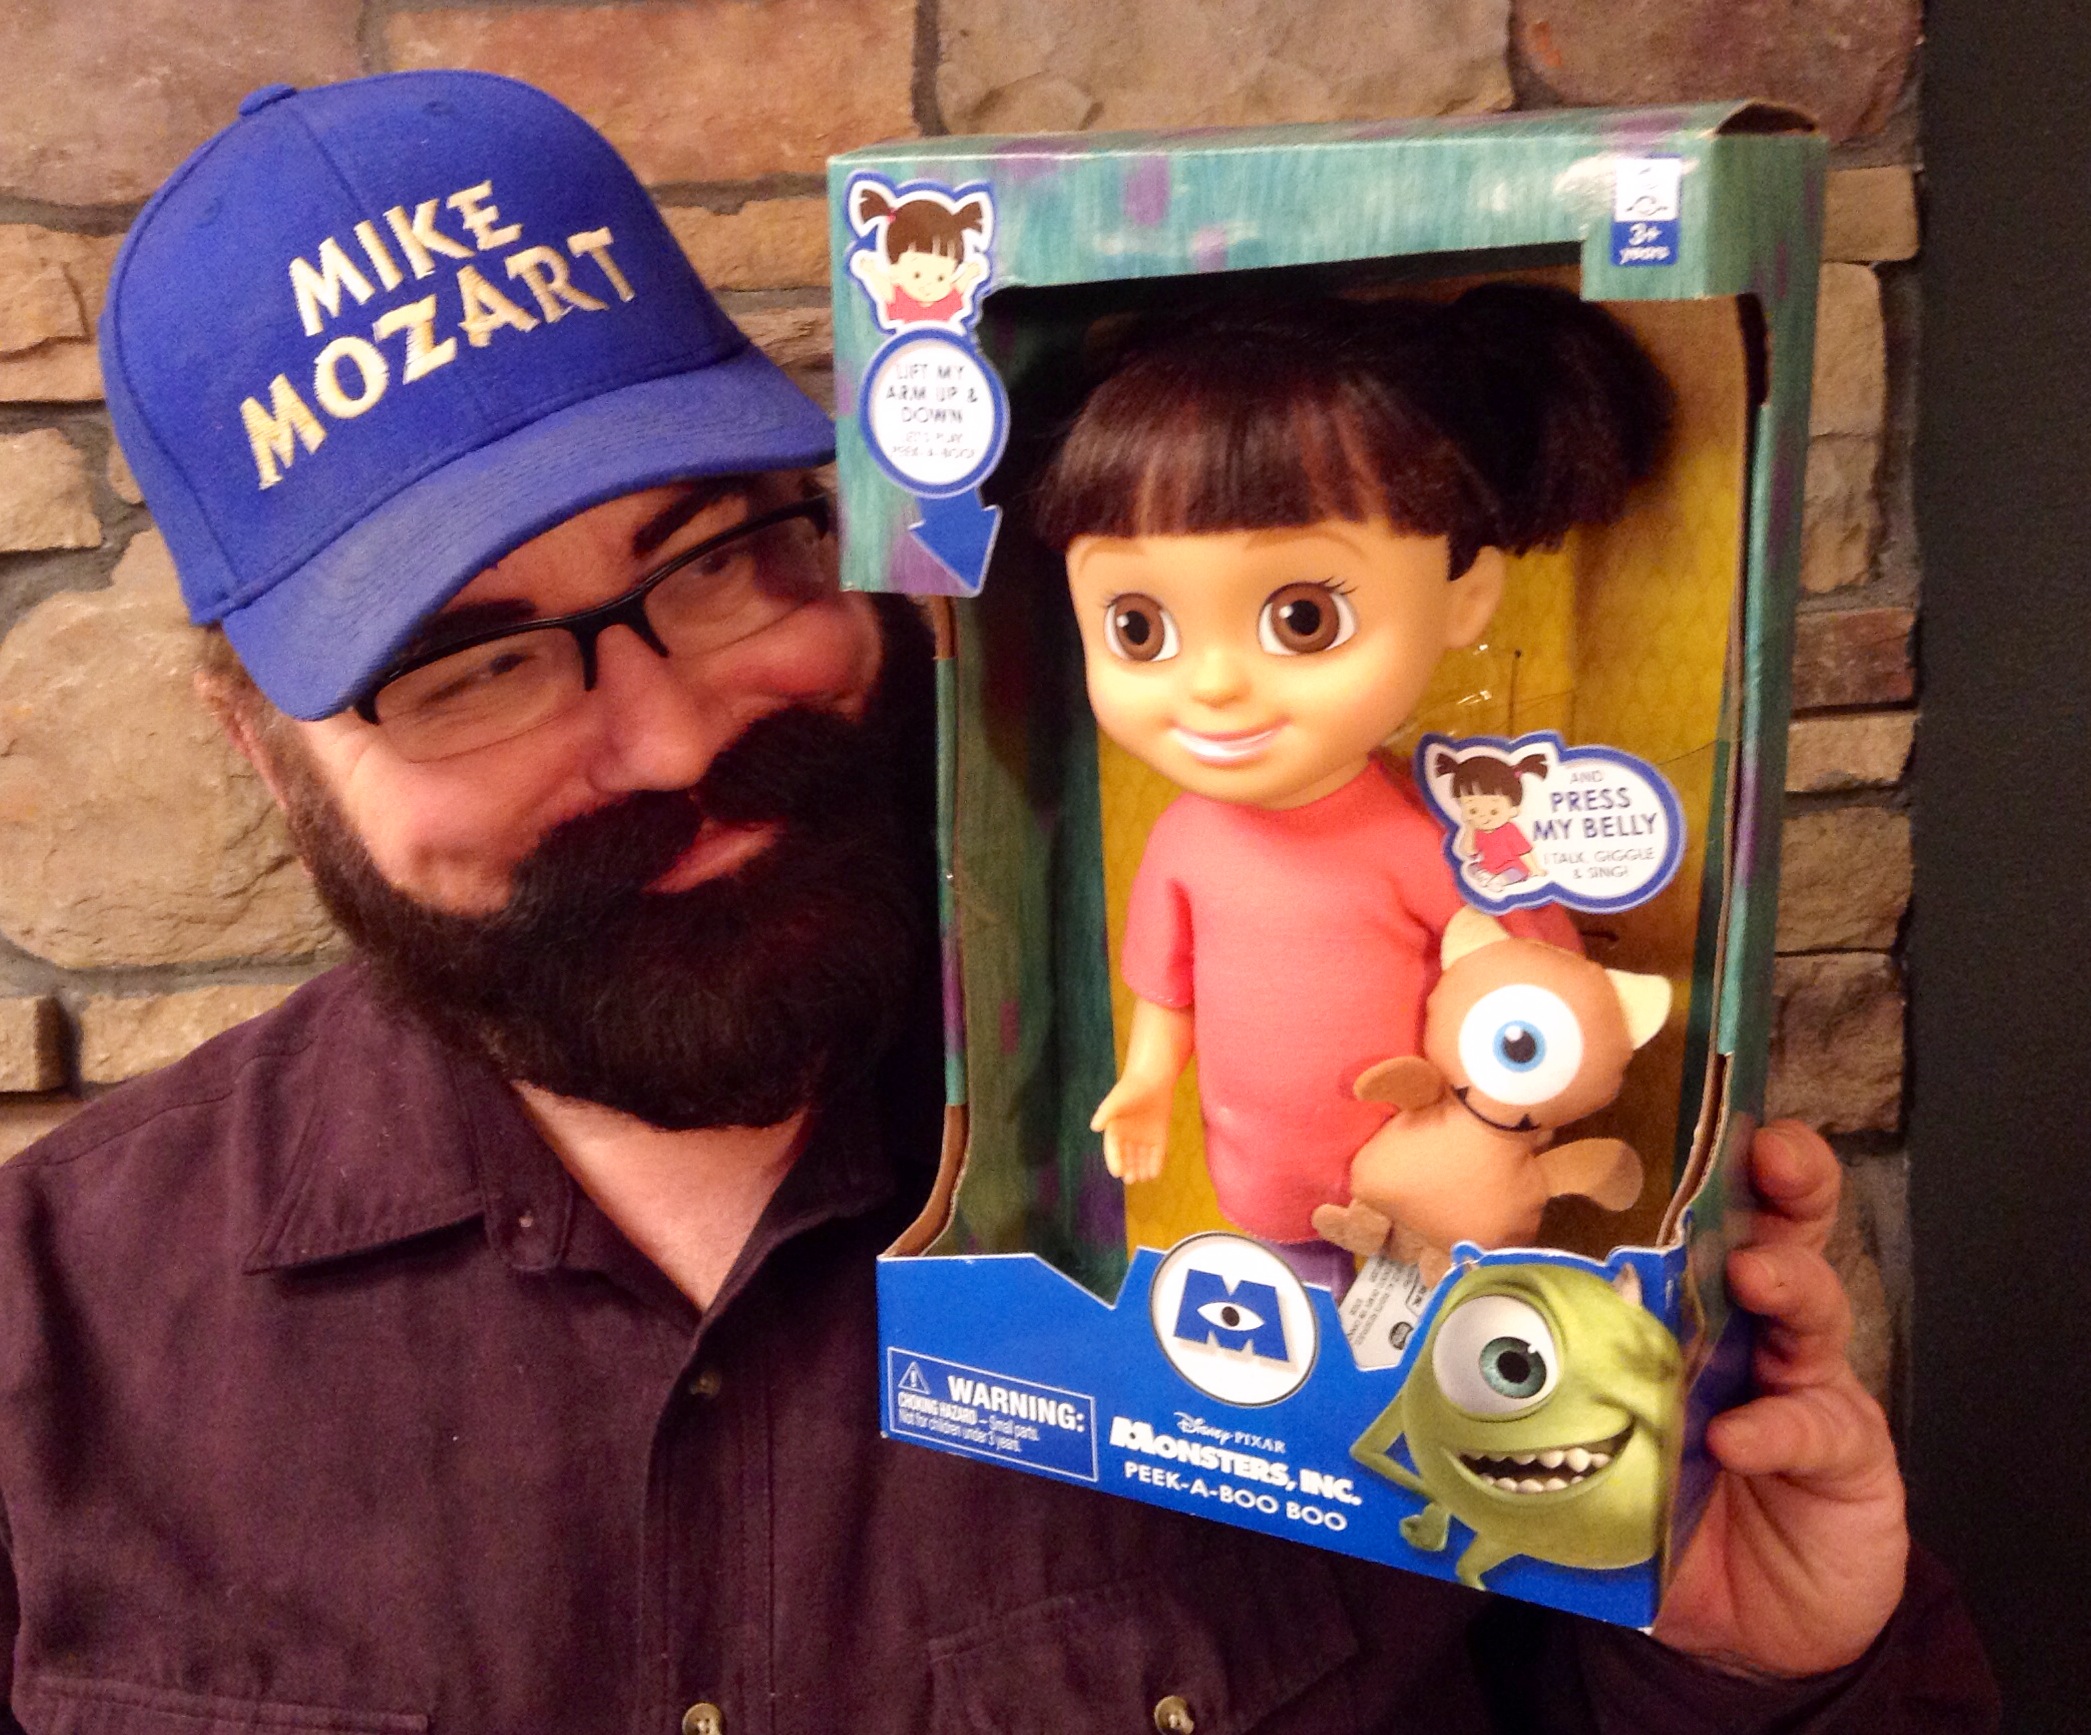 a man with glasses holding a new in package doll